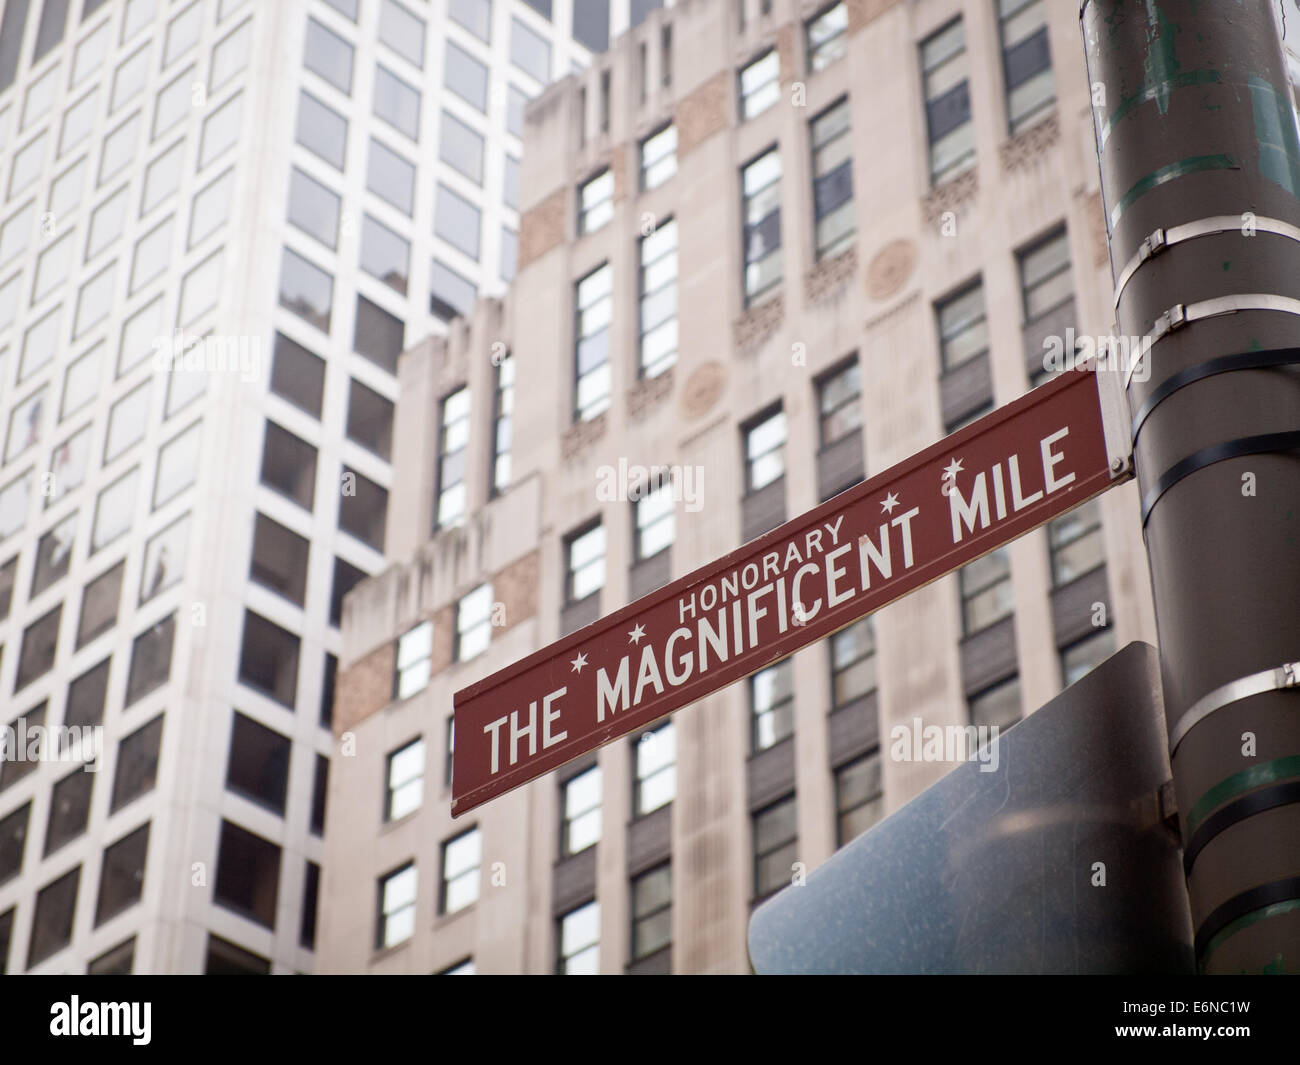 A street sign depicting the honorary Magnificent Mile, also known as North Michigan Avenue in Chicago, Illinois. Stock Photo